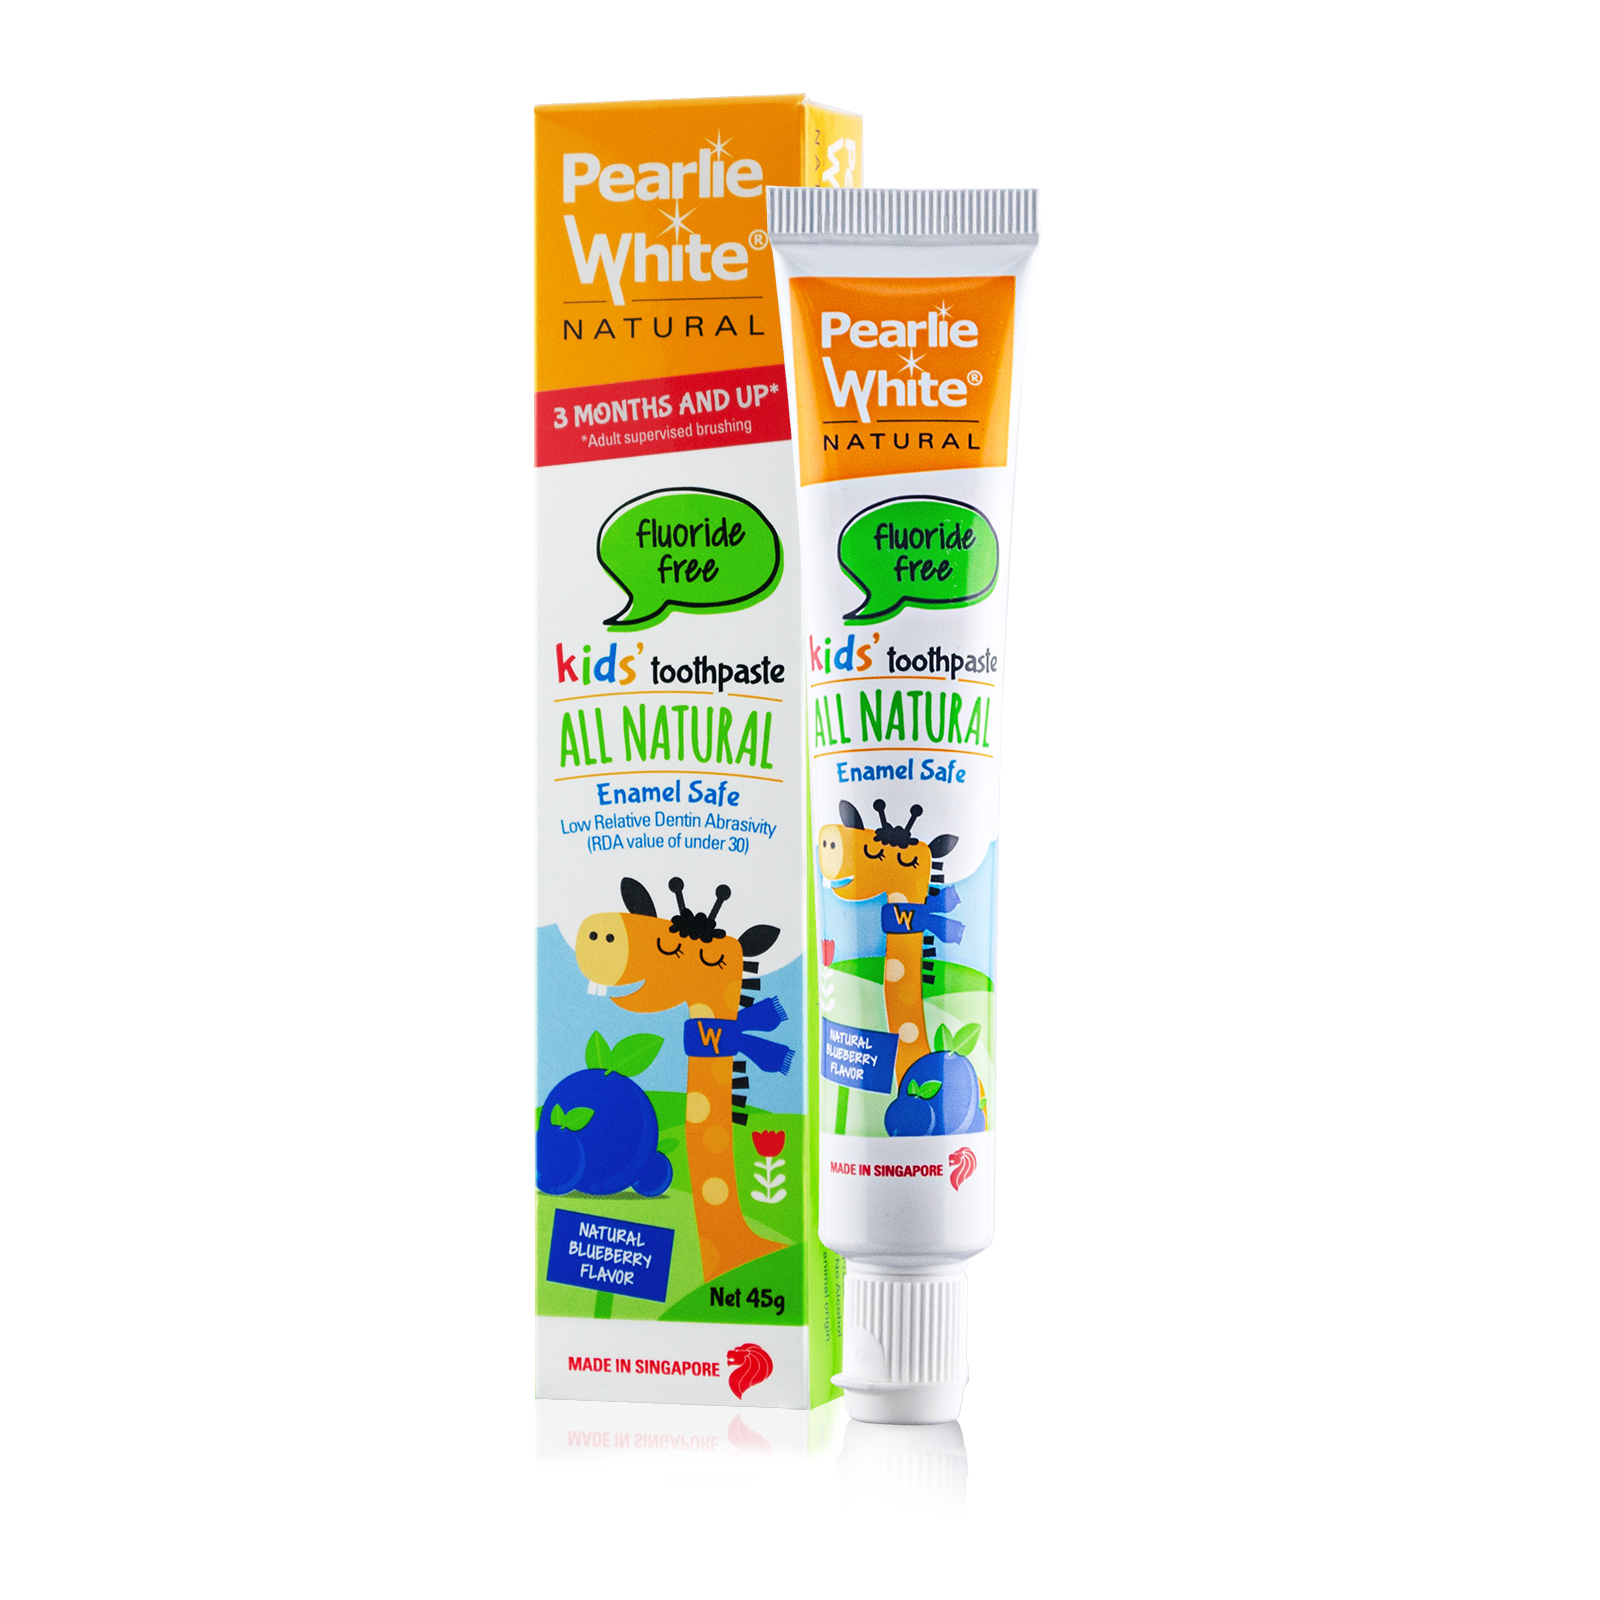 Pearlie White All Natural Enamel Safe Kids Blueberry Toothpaste (Fluoride Free) 45g